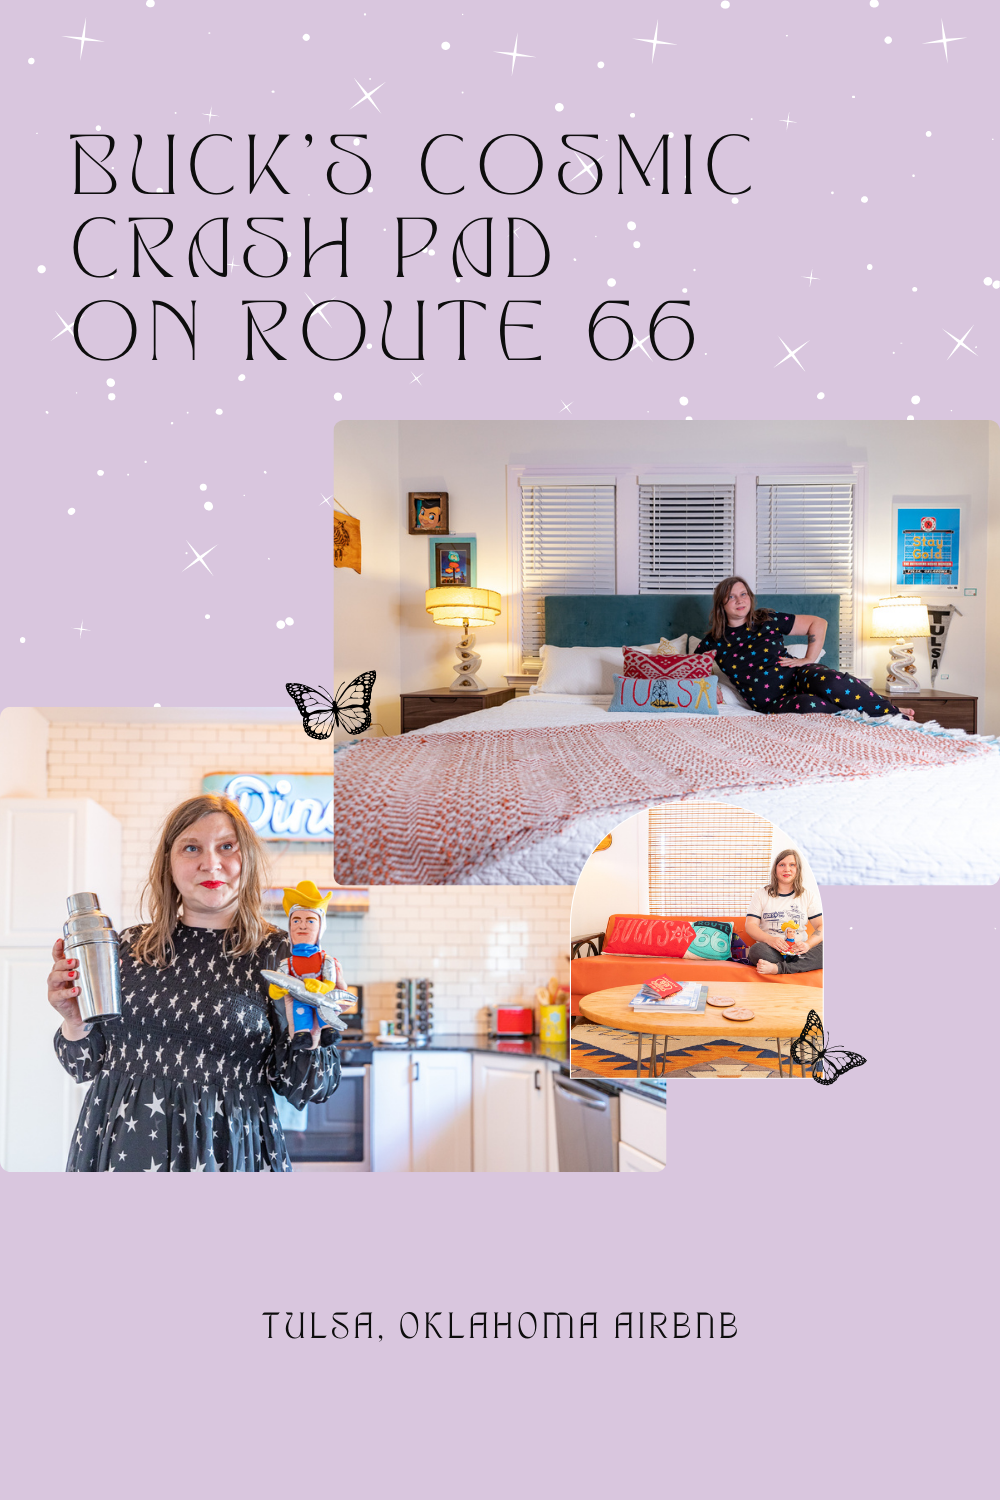 Are you looking for a unique place to stay on Route 66? The answer might just be written in the stars. Or, at least in Tulsa, Oklahoma. A stay at Buck's Cosmic Crash Pad on Route 66 will leave you feeling over the moon. This Tulsa, Oklahoma AirBNB is a must stay on a Route 66 road trip.  #RoadTrips #RoadTripStop #Route66 #Route66RoadTrip #OklahomaRoute66 #Oklahoma #OklahomaRoadTrip #OklahomaRoadsideAttractions #RoadsideAttractions #RoadsideAttraction #RoadsideAmerica #RoadTrip #TulsaAirbnb